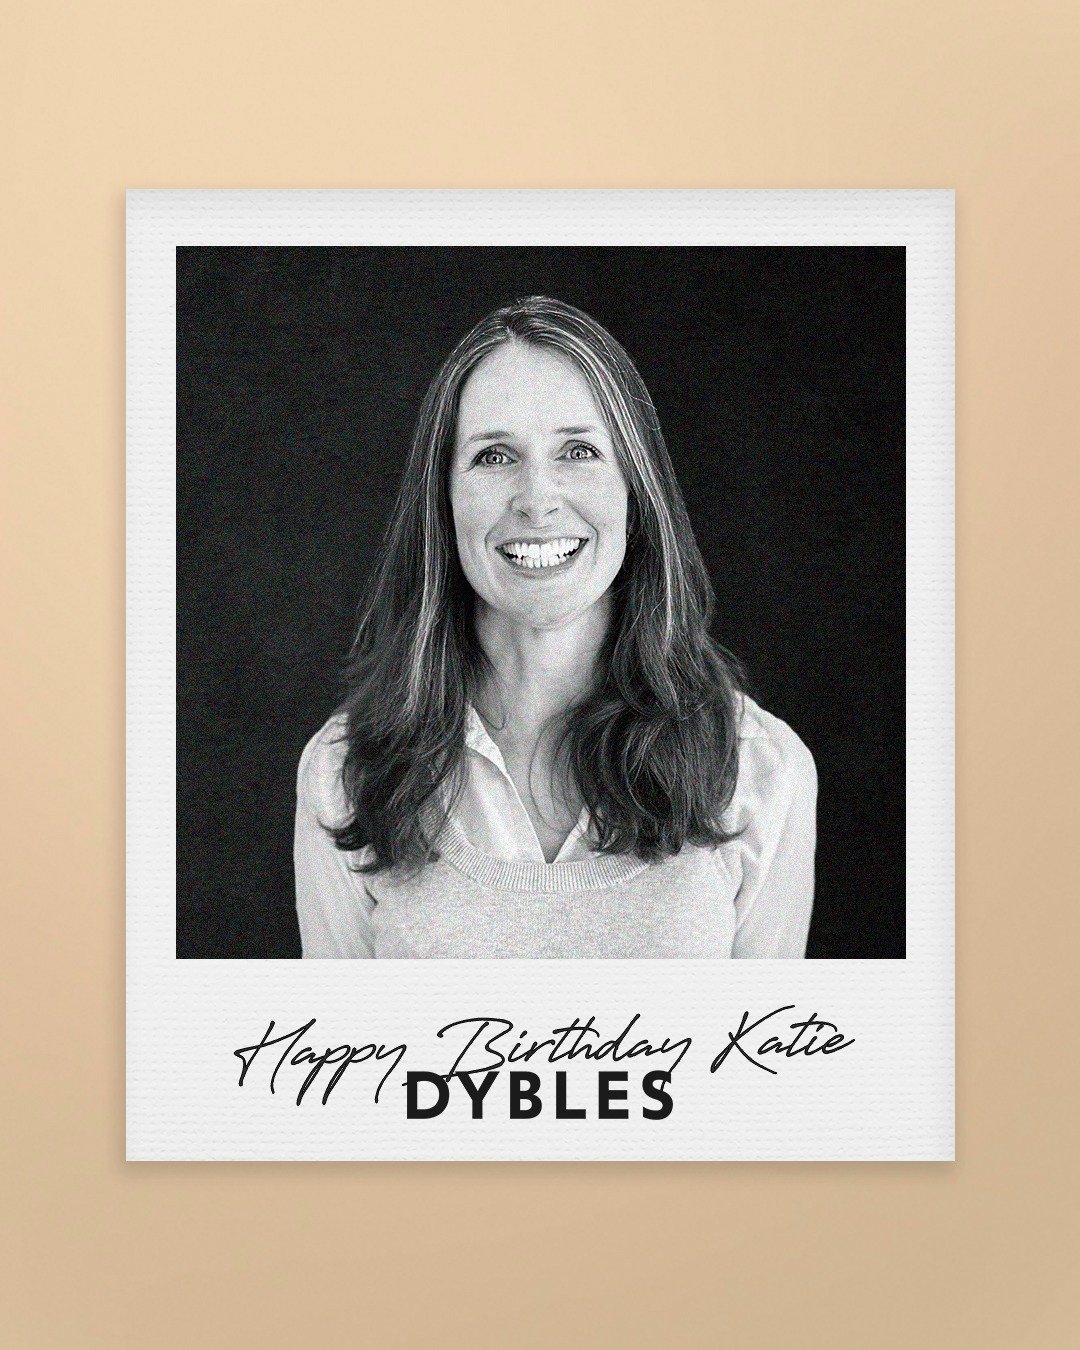 🎉🎈 Happy Birthday to Katie, our wonderful client care manager, from all of us at Dybles! 🎂🥳 We hope you have a fantastic day! 🎉🎁 #HappyBirthday #Celebration 🎈🎊